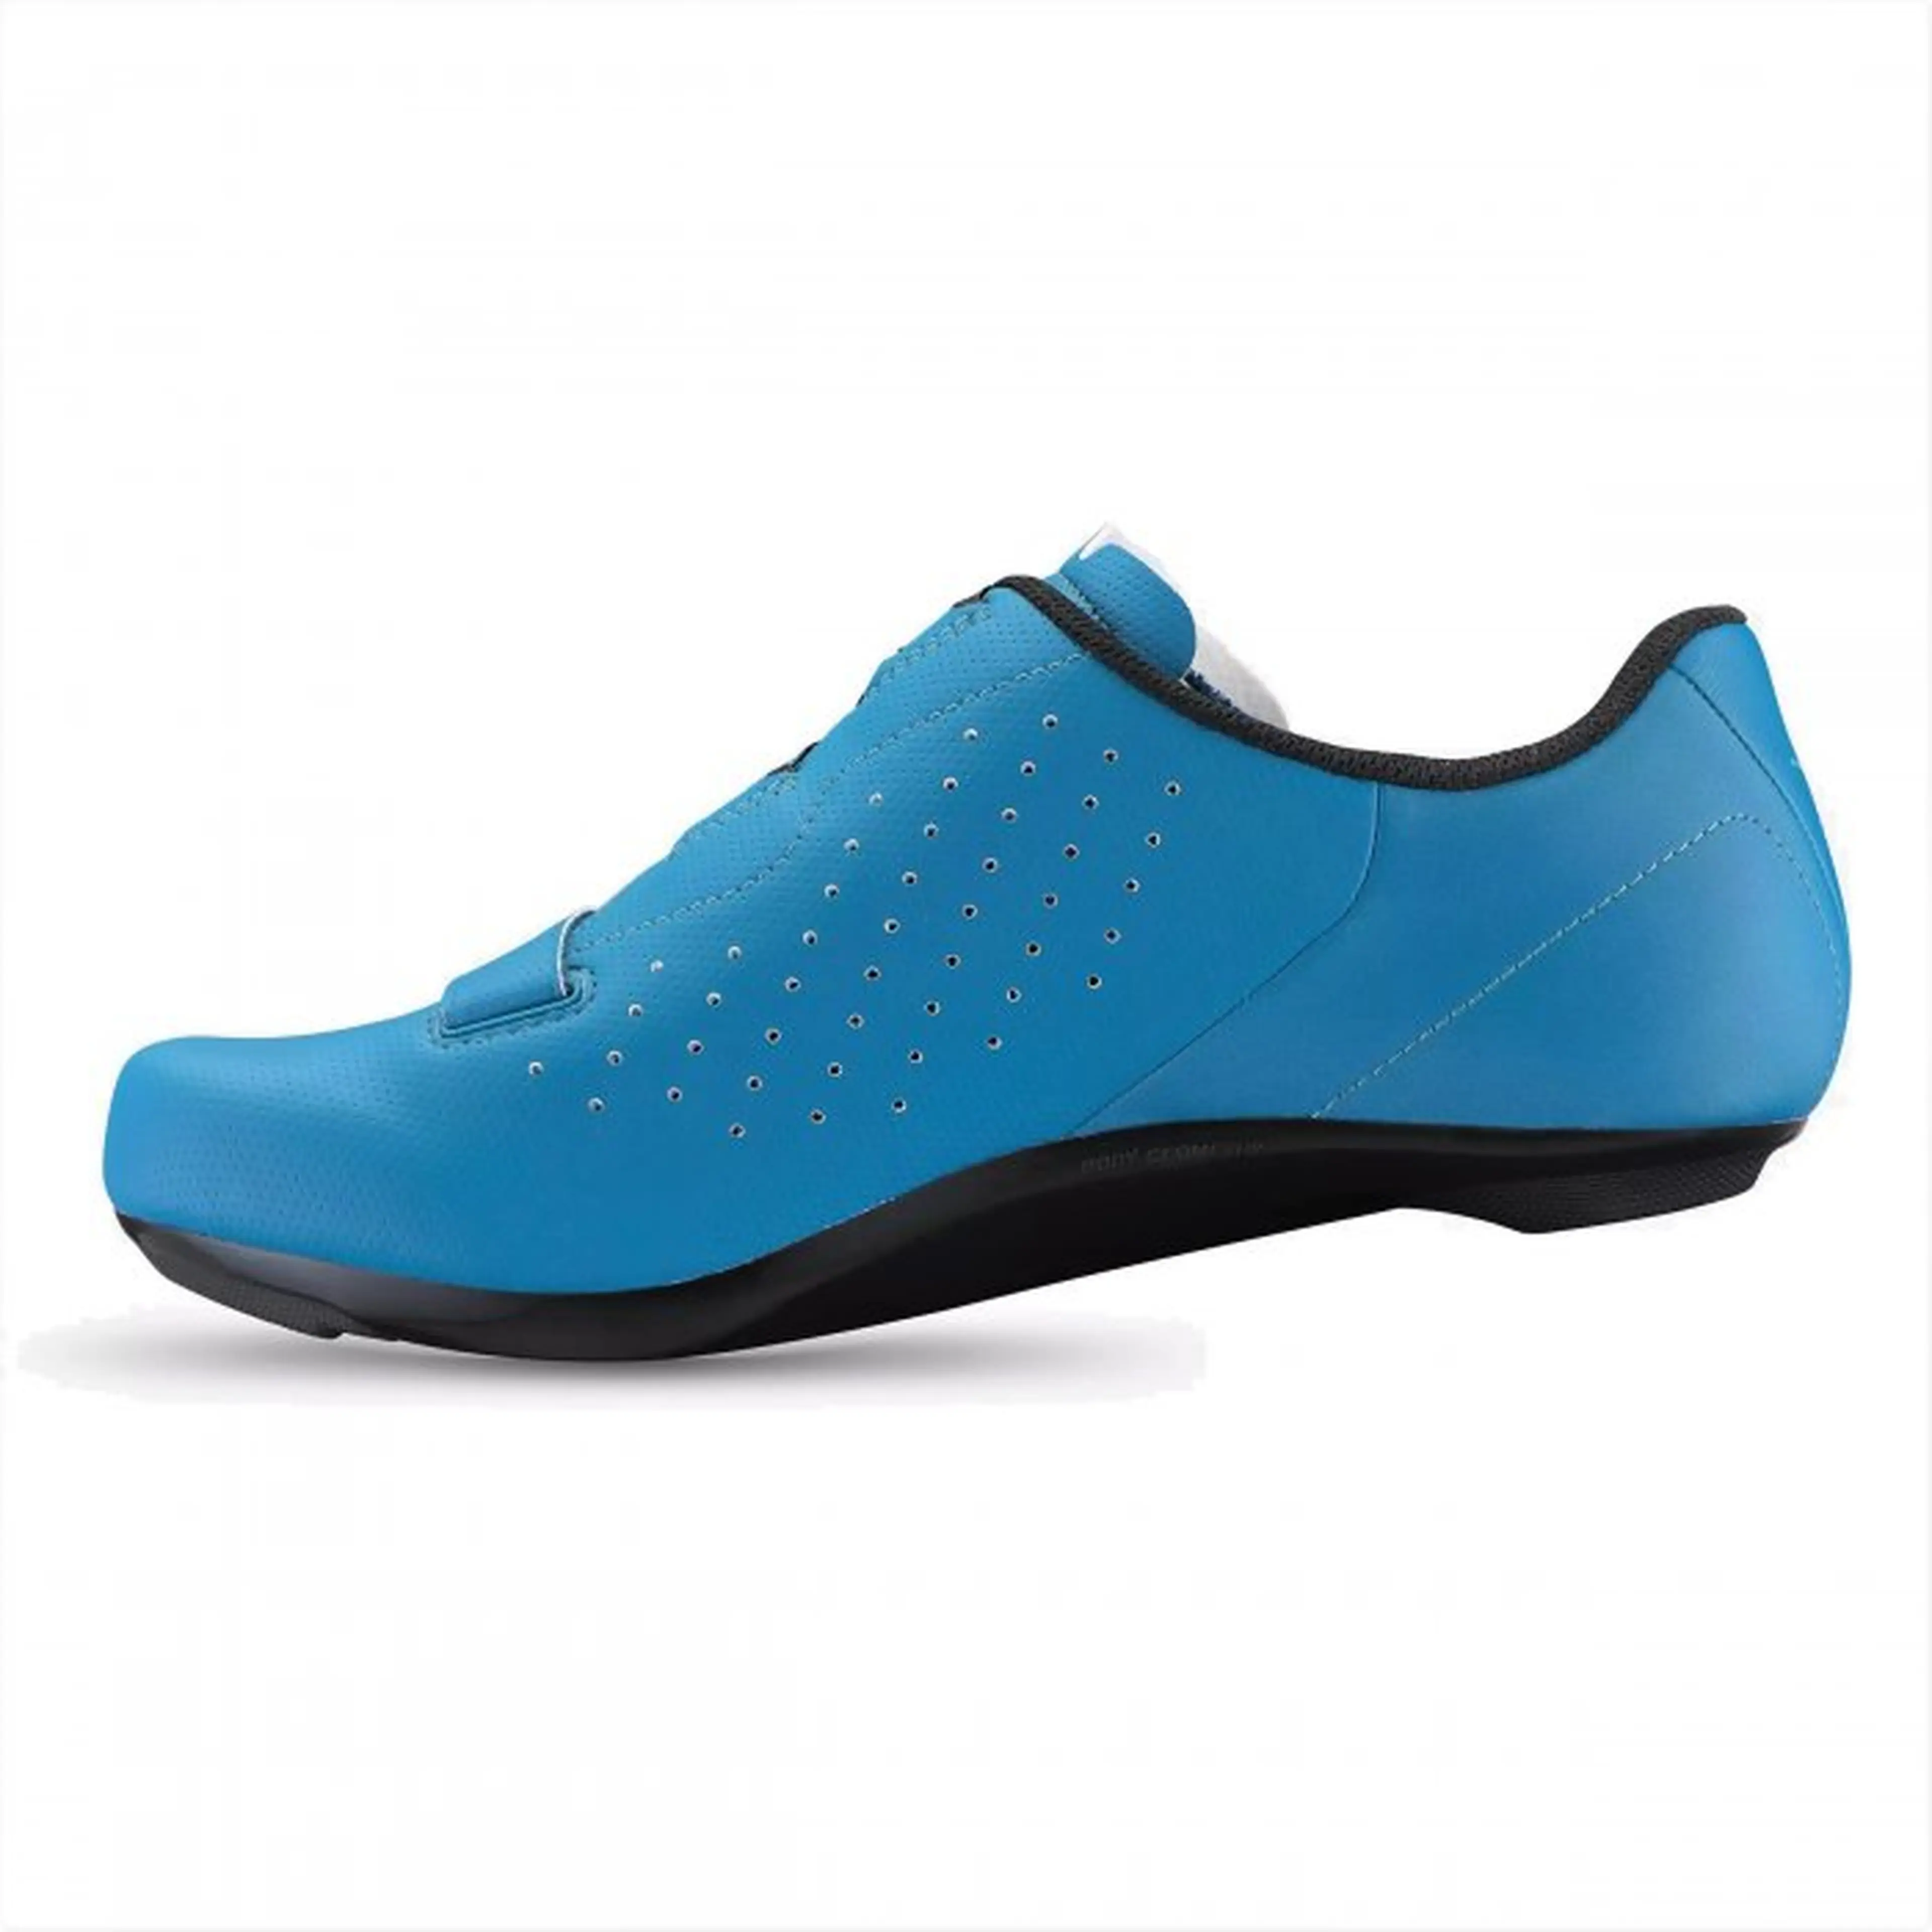 5. Pantofi SPECIALIZED Torch 1.0 Road - Tropical Teal/Lagoon Blue